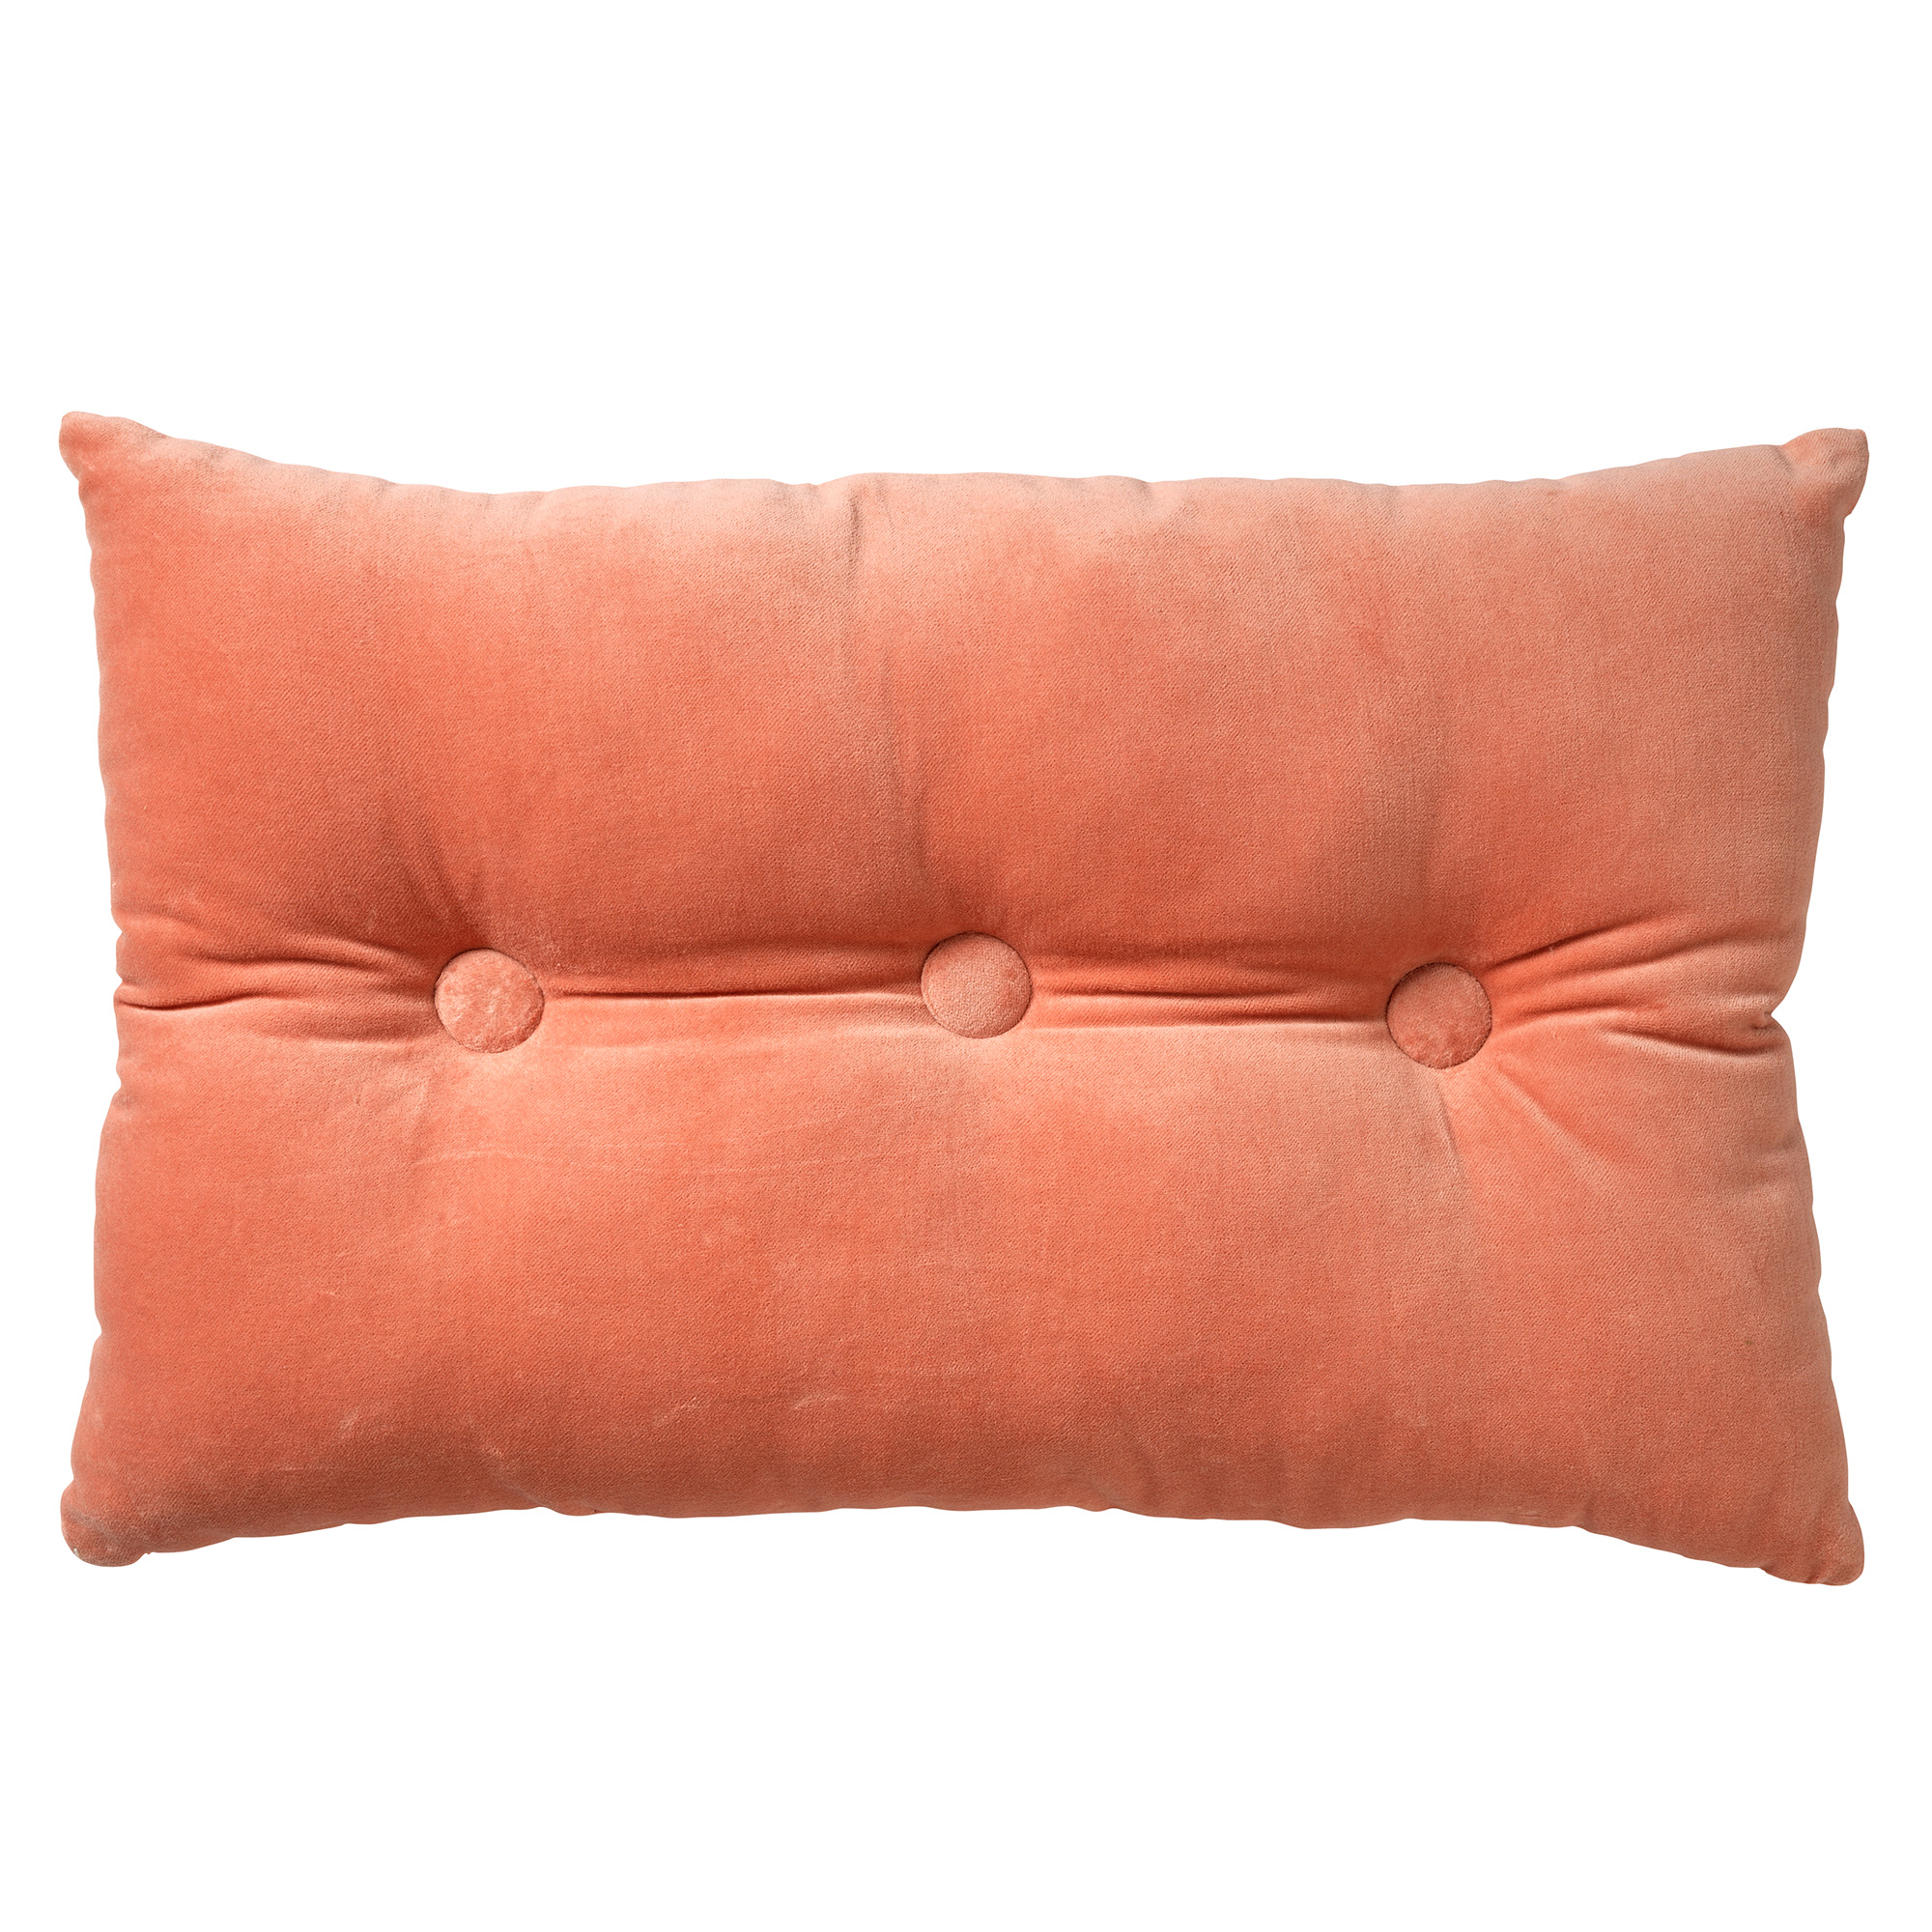 VALERIE - Cushion 40x60 cm Muted Clay - pink